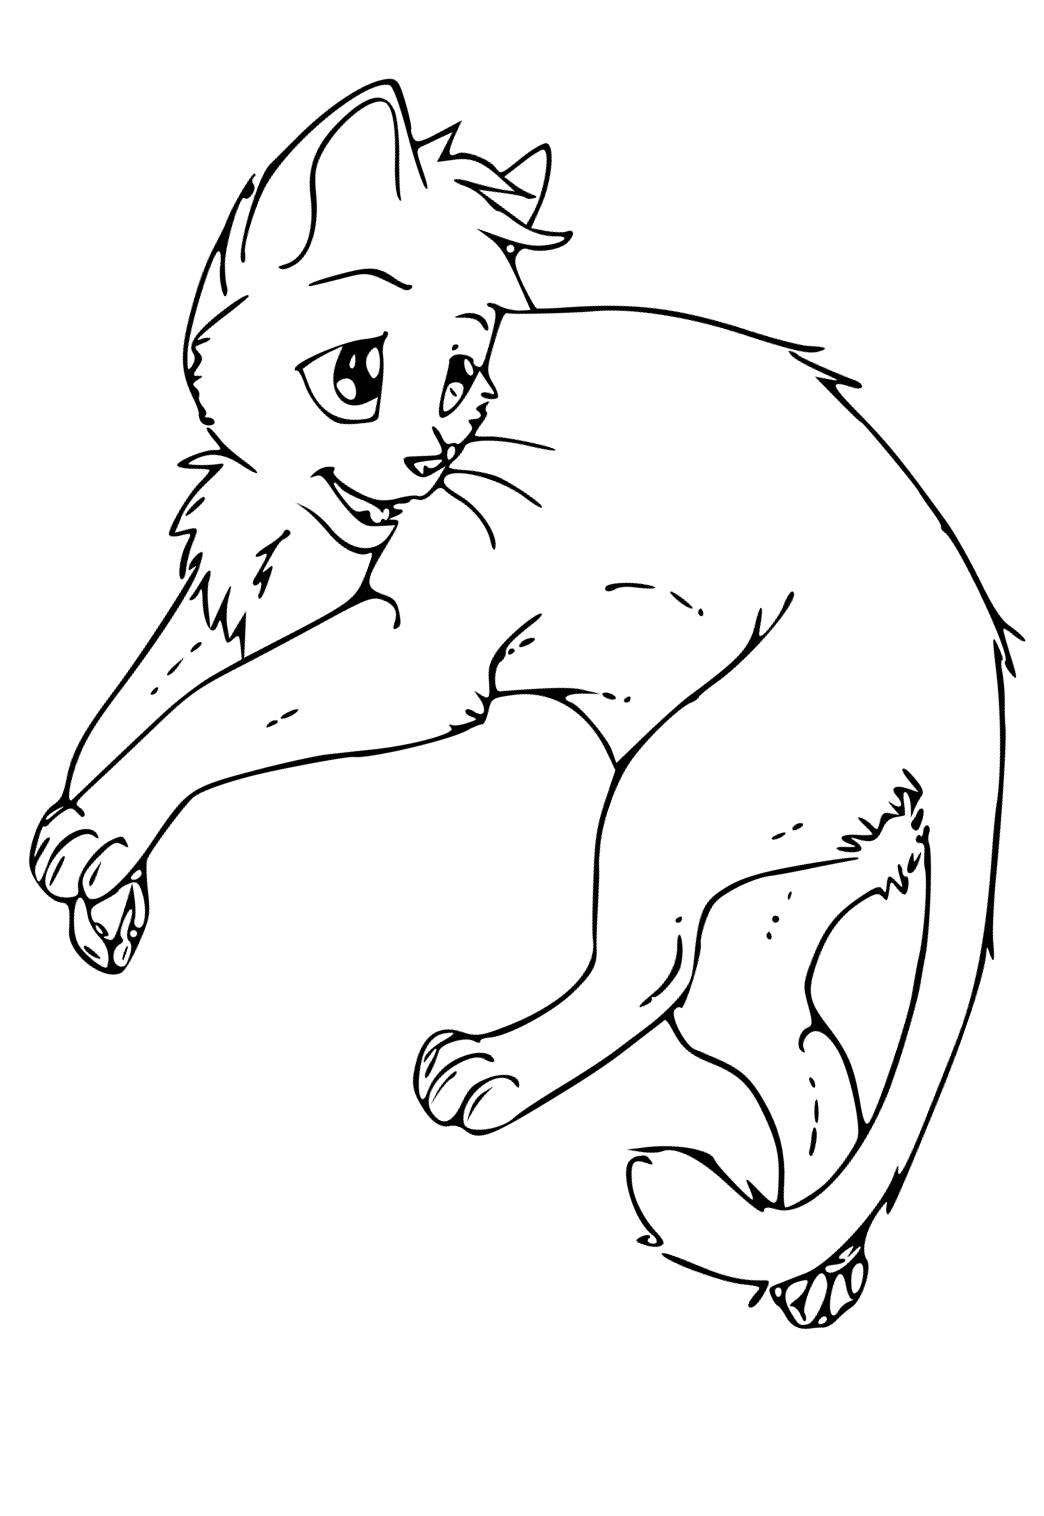 Free printable warrior cats fear coloring page for adults and kids